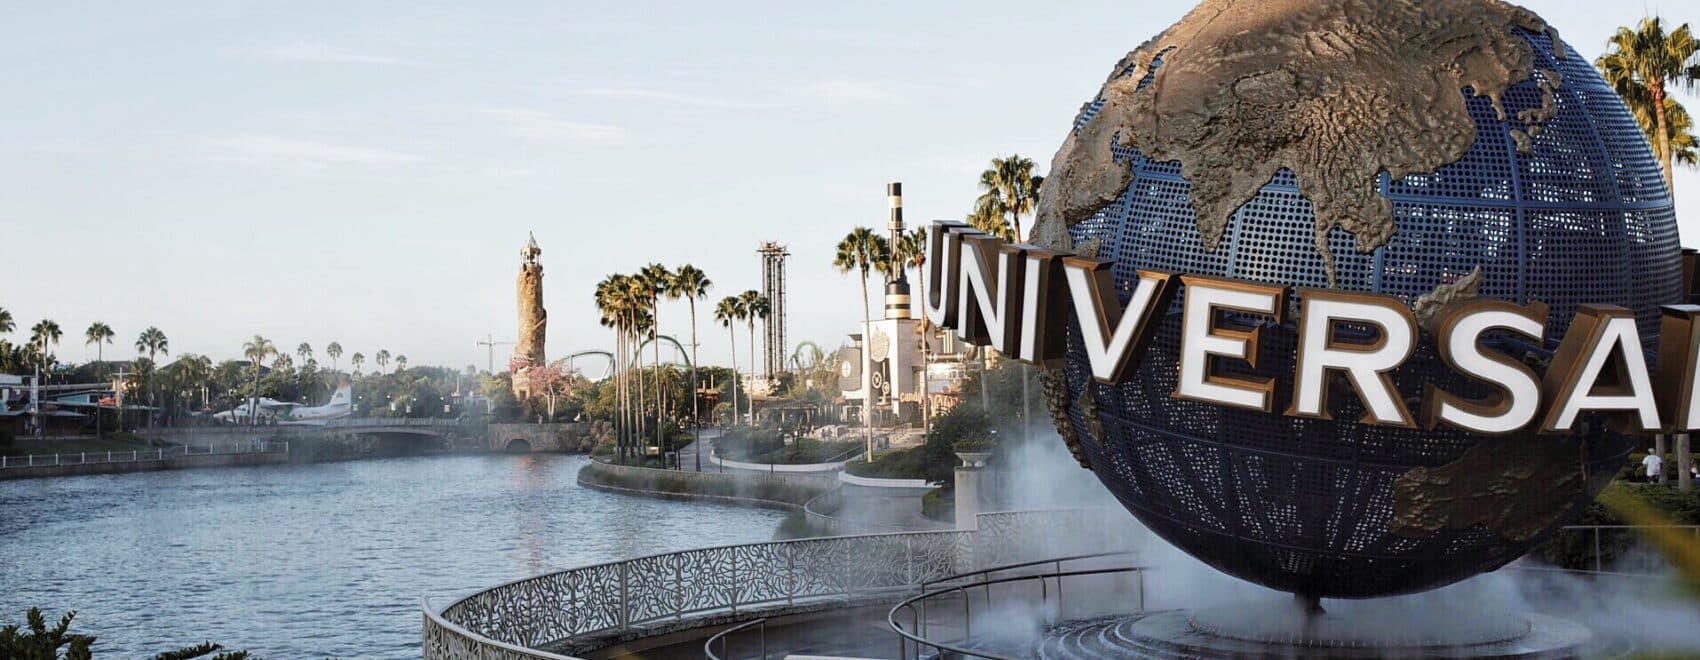 A beautiful sunny day at the entrance to Universal Studios Orlando, overlooking the water and the Universal sign in fun Florida.